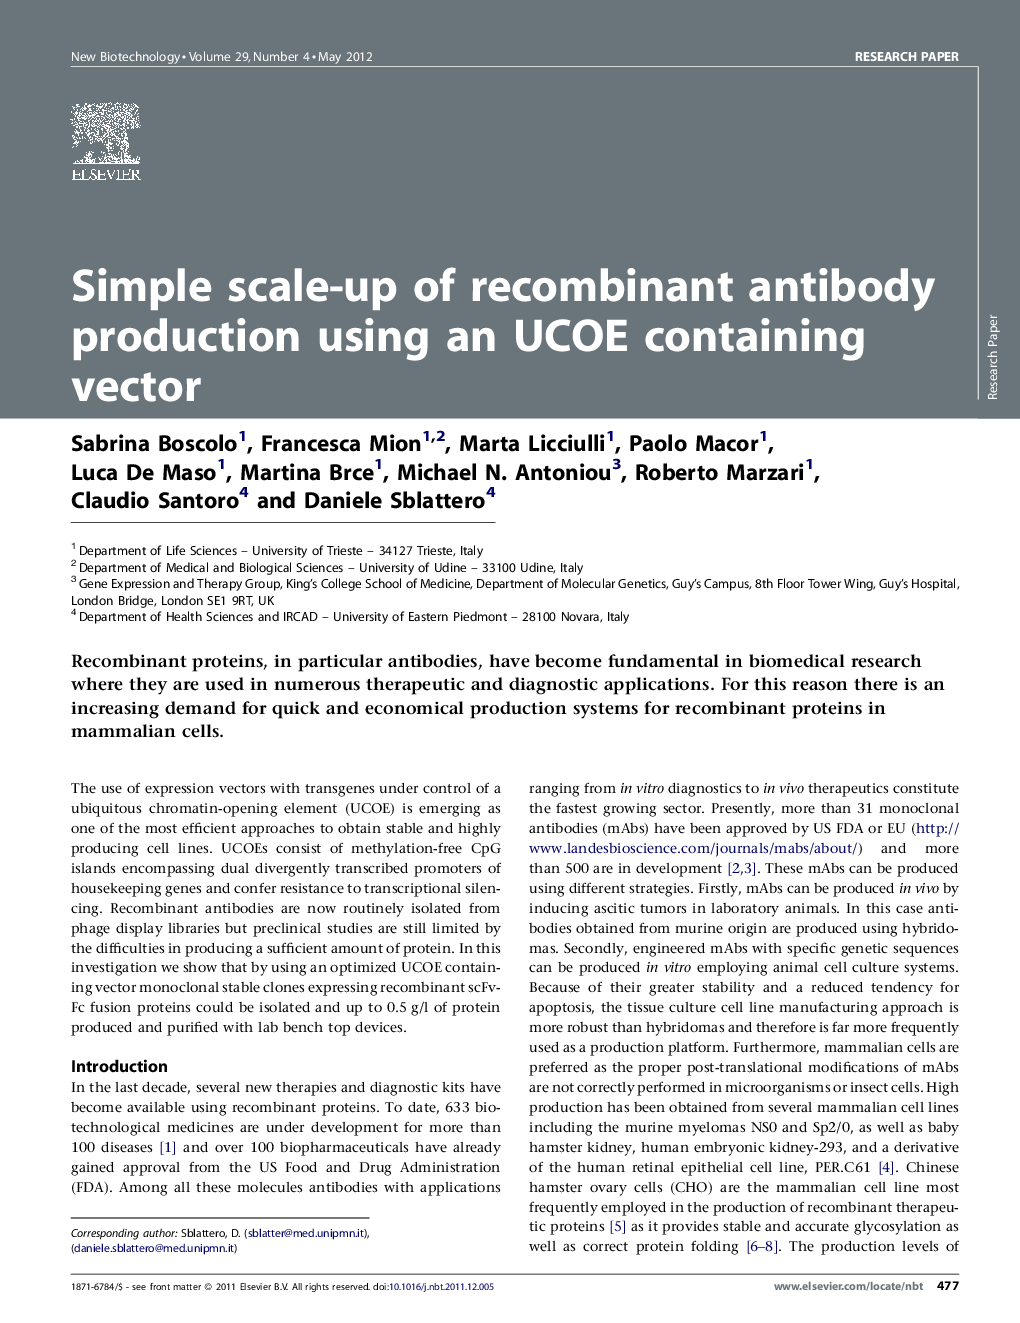 Simple scale-up of recombinant antibody production using an UCOE containing vector